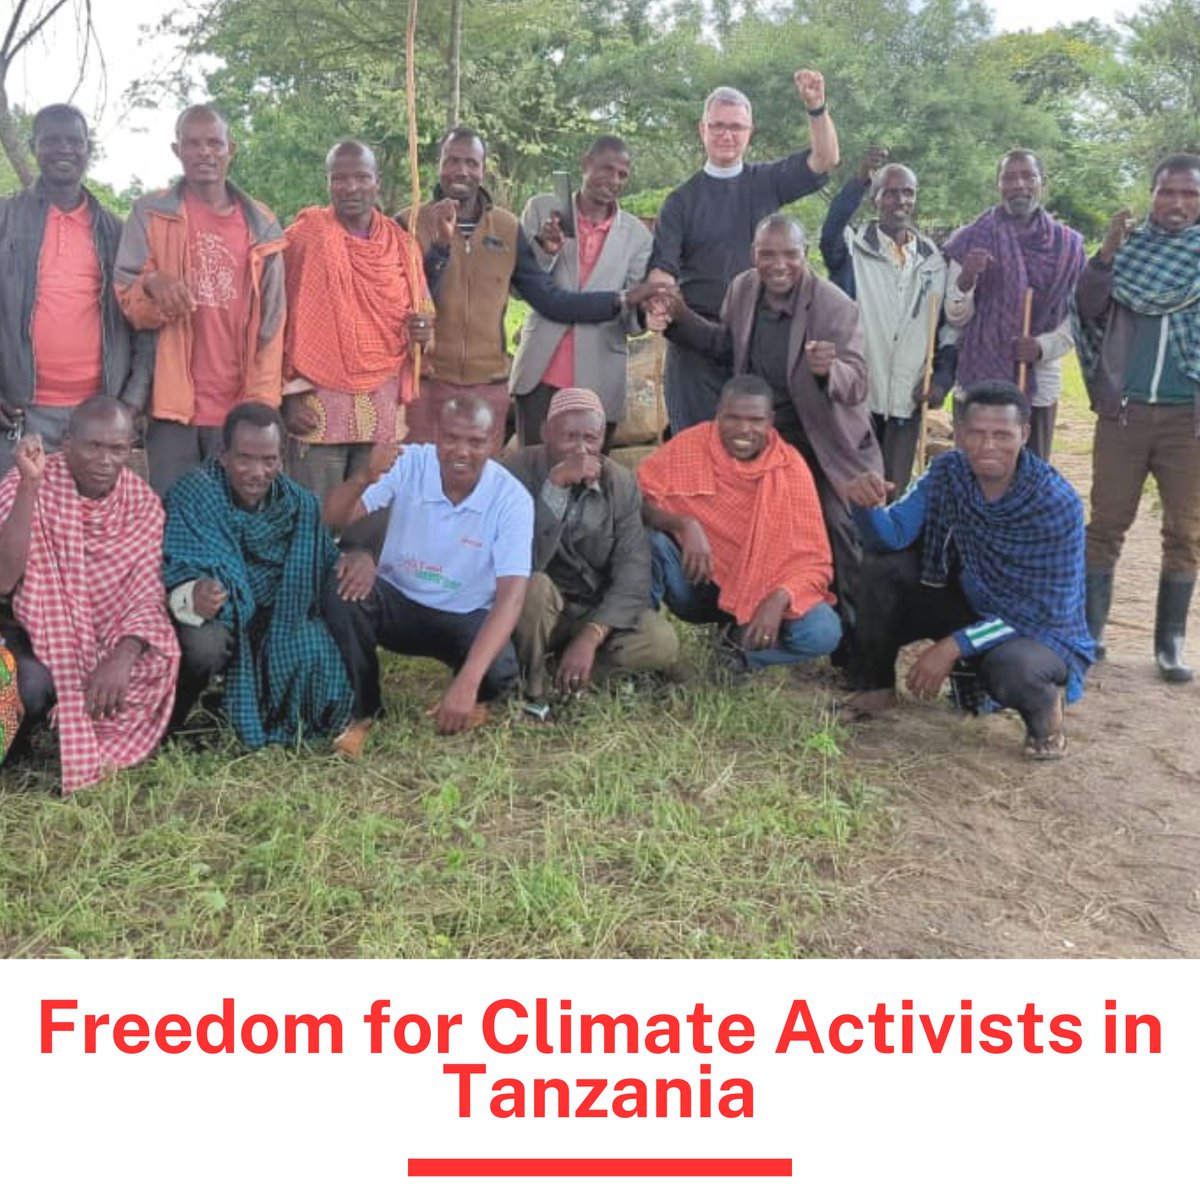 Article 19 of the Universal Declaration of Human Rights clearly states freedom of expression as a fundamental human right.

The constant investigation of #climateactivists in Tanzania is a strategy to repress the voice and concerns of citizens against #EACOP

#Faiths4Climate